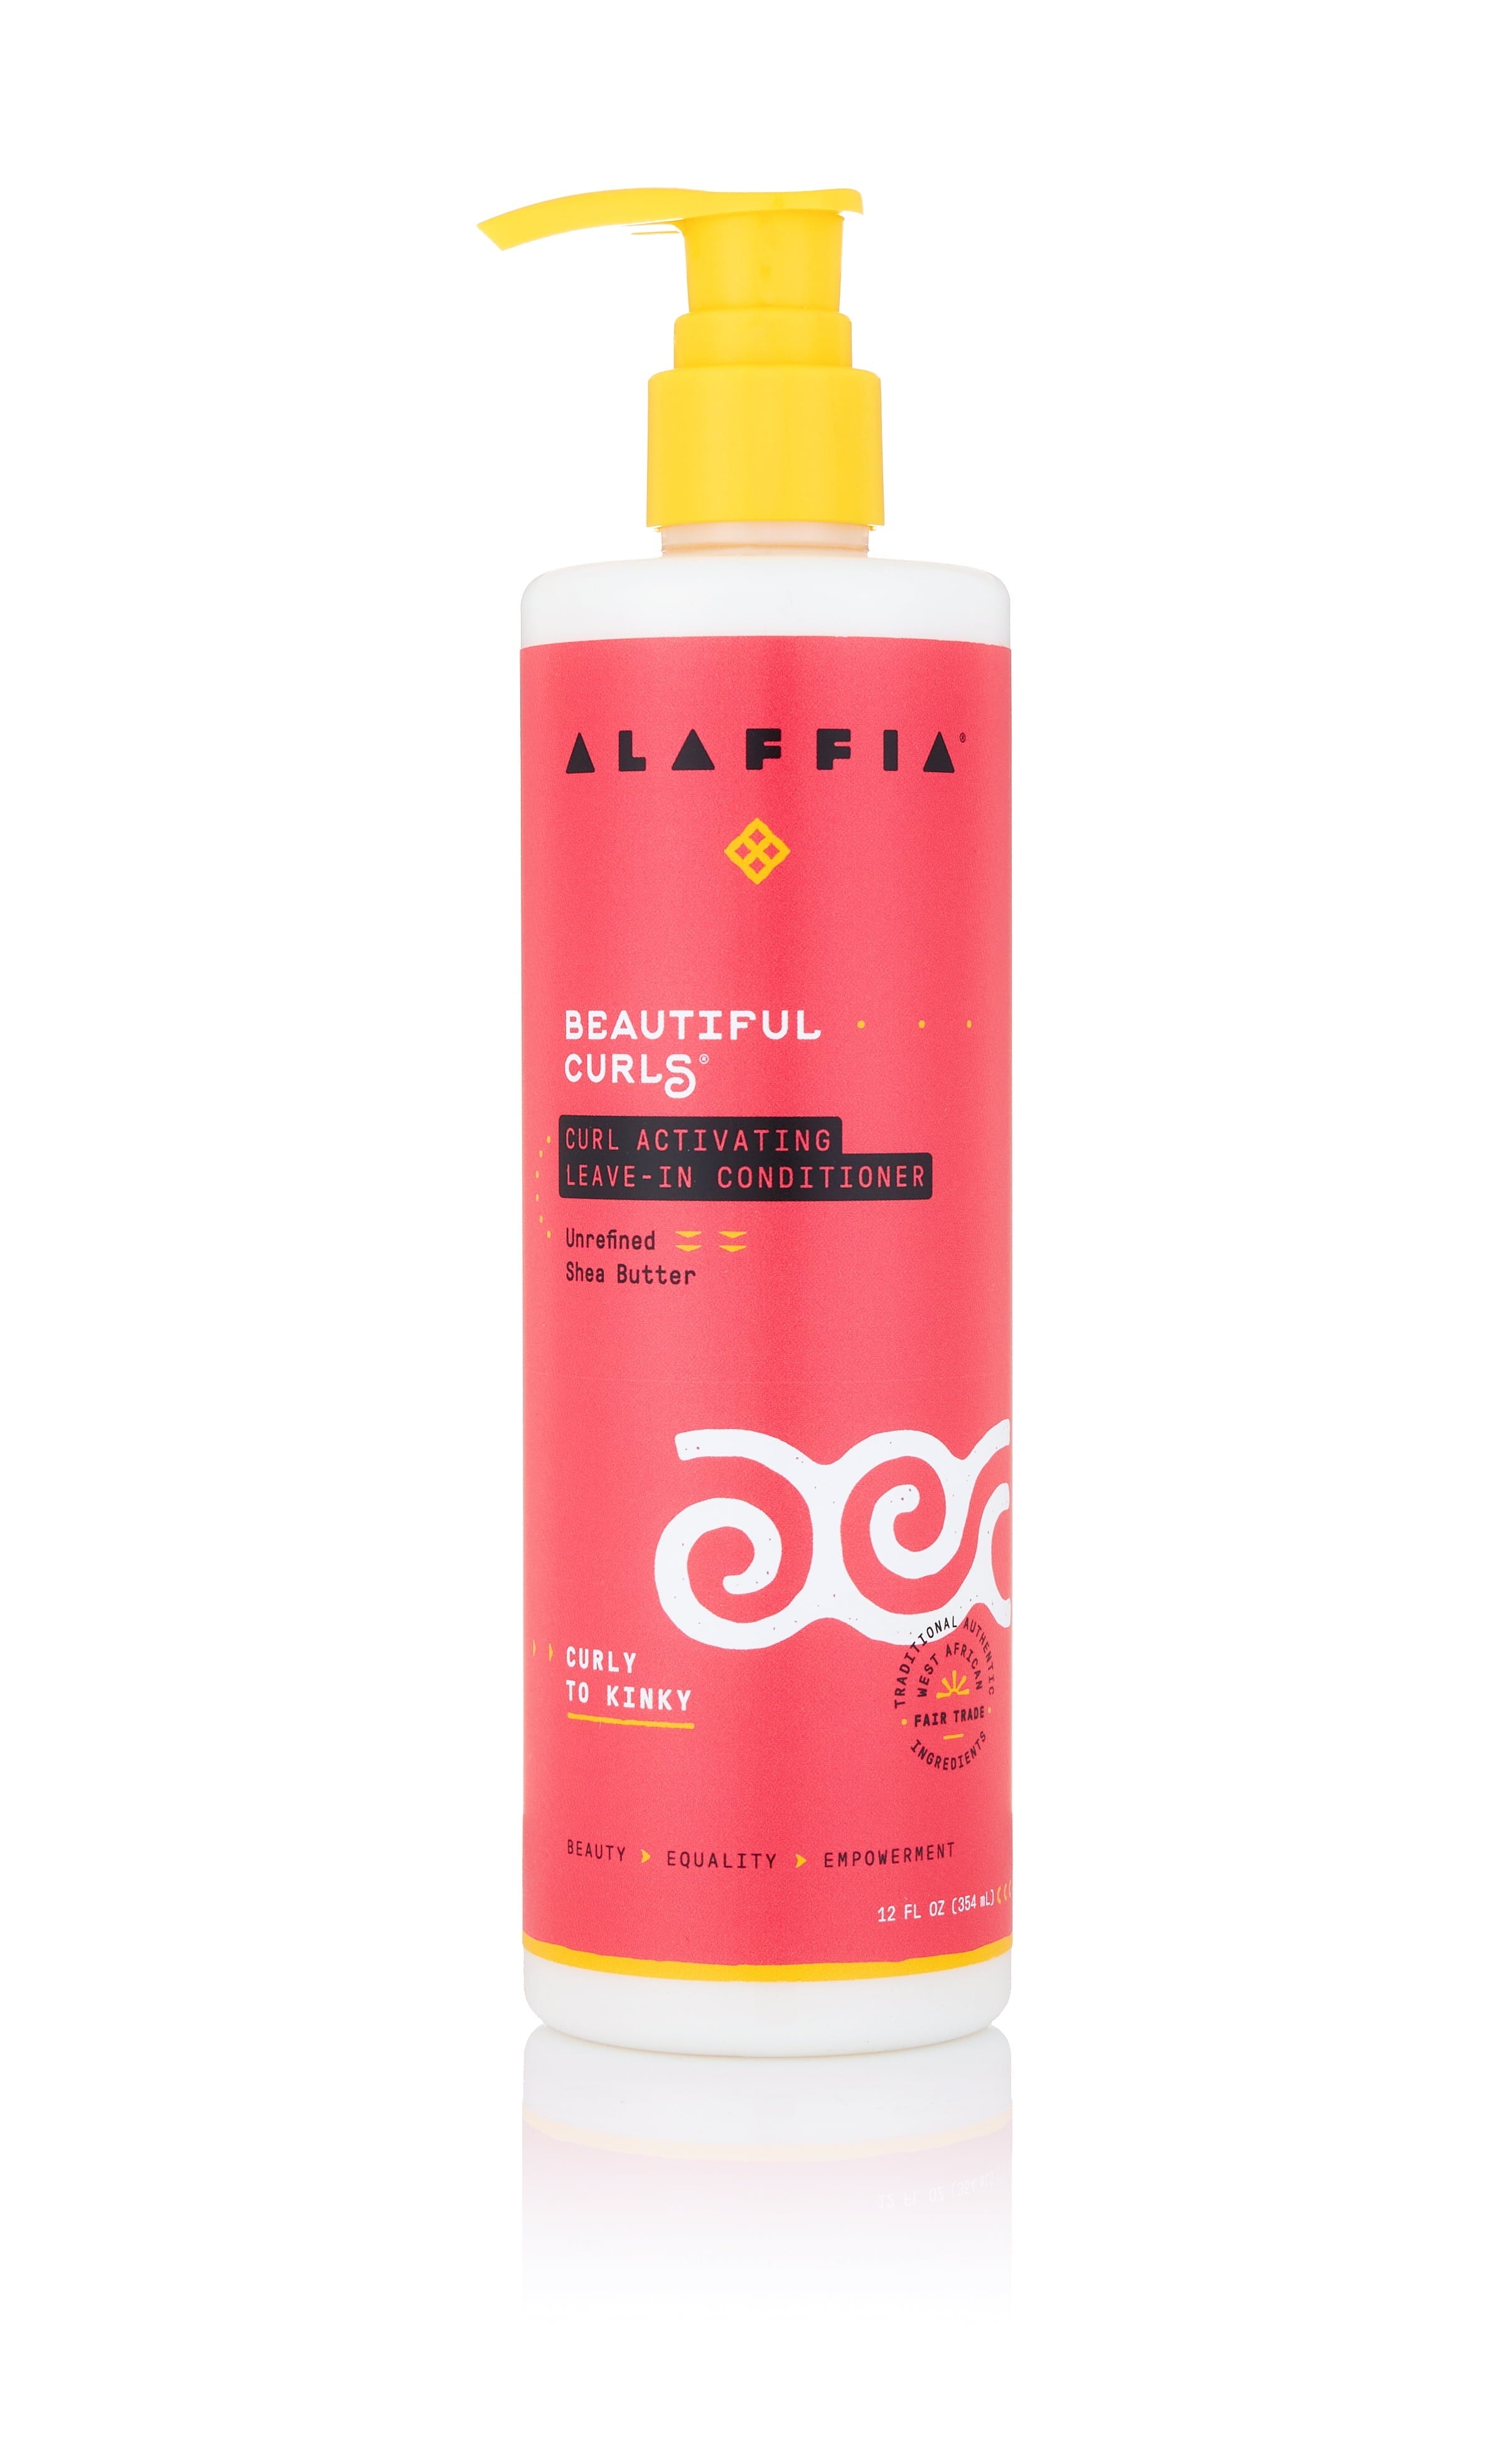 Alaffia, Beautiful Curls, Curl Activating Leave-In Conditioner, Curly to Kinky, Unrefined Shea Butter, 12 oz Bottle